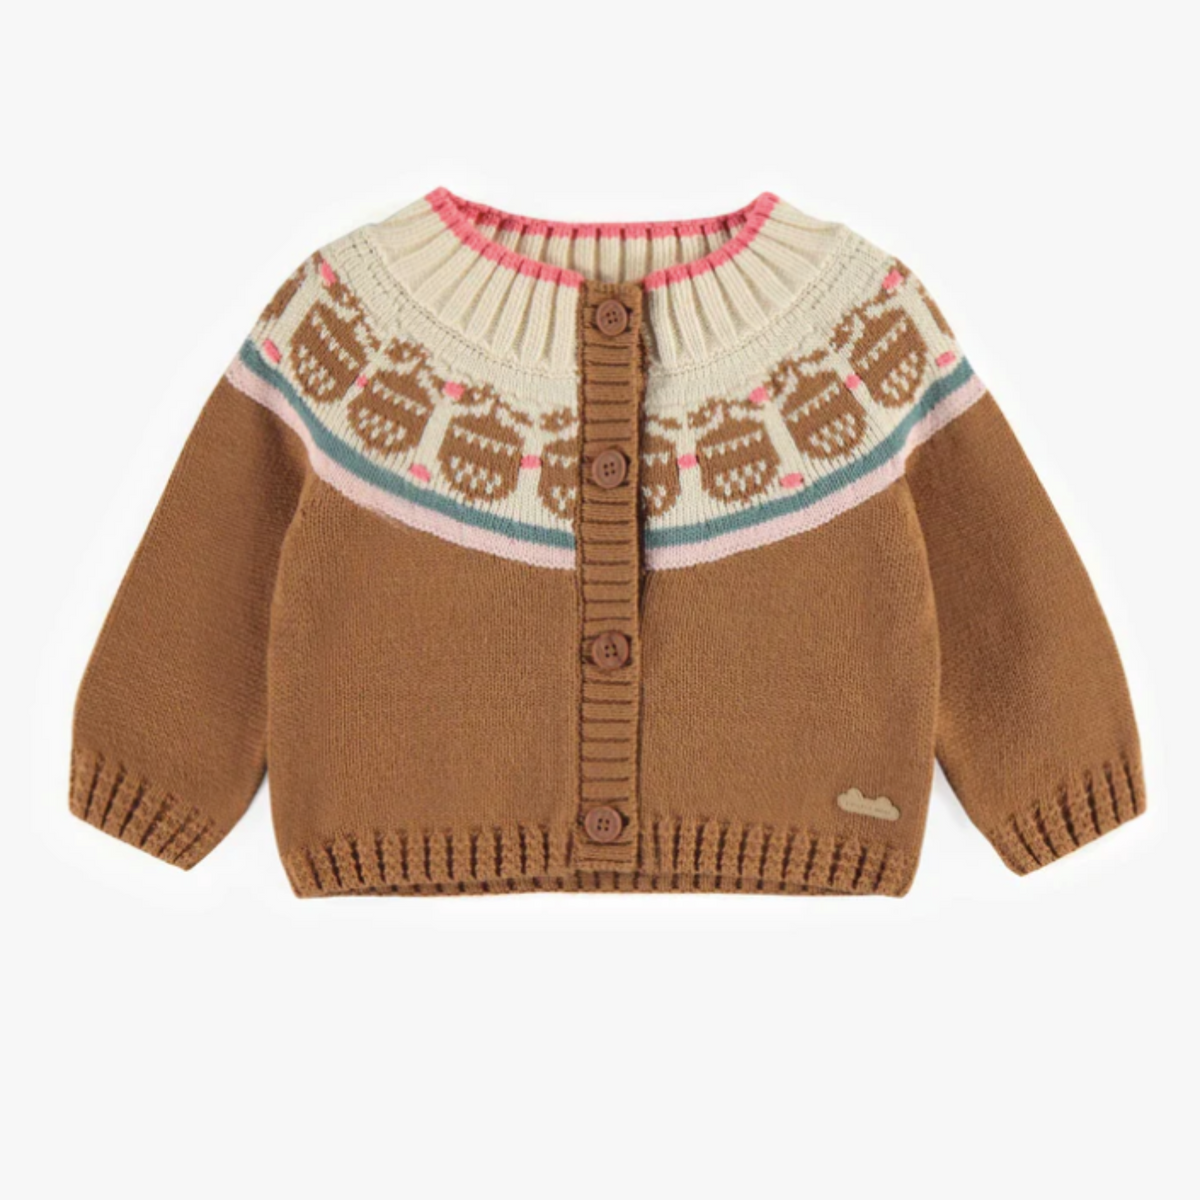 Brown Patterned Knitted Vest in Cotton Cashmere, Baby